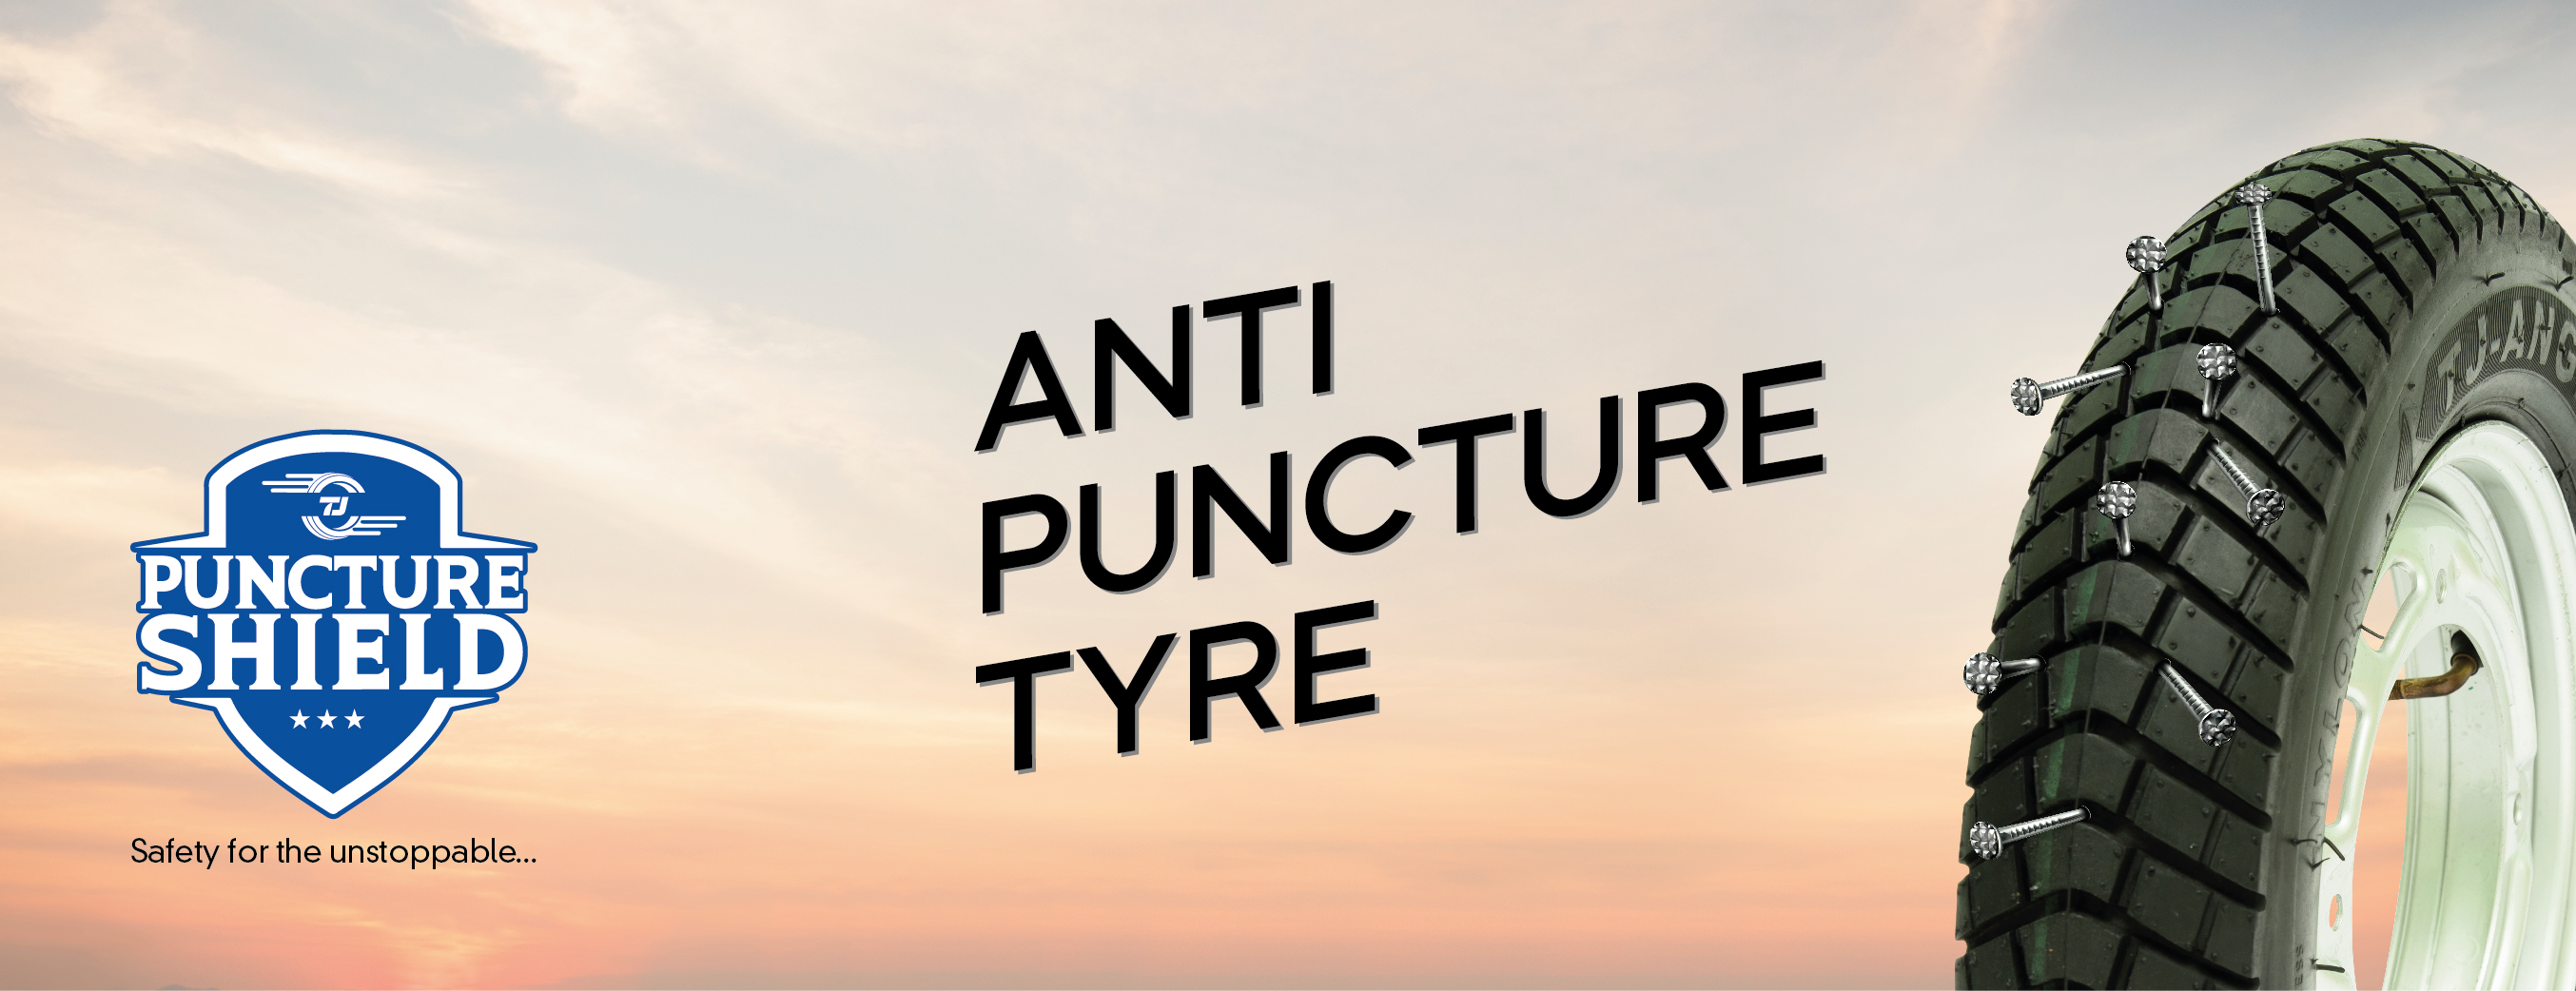 Anti Puncture Tyre